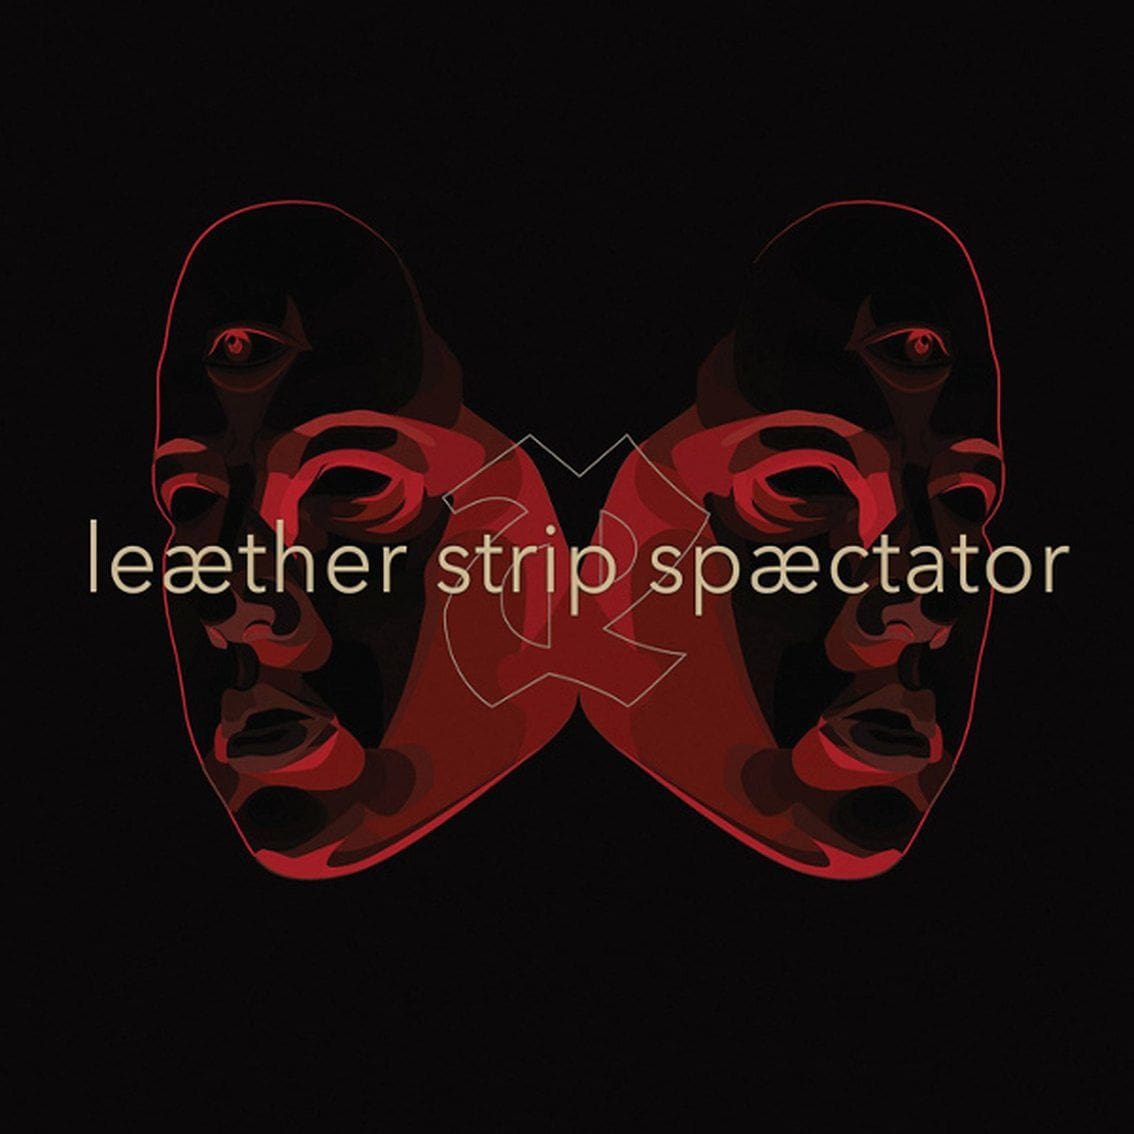 Leaether Strip launches'Spectator' album on 2CD and vinyl - get your orders in now